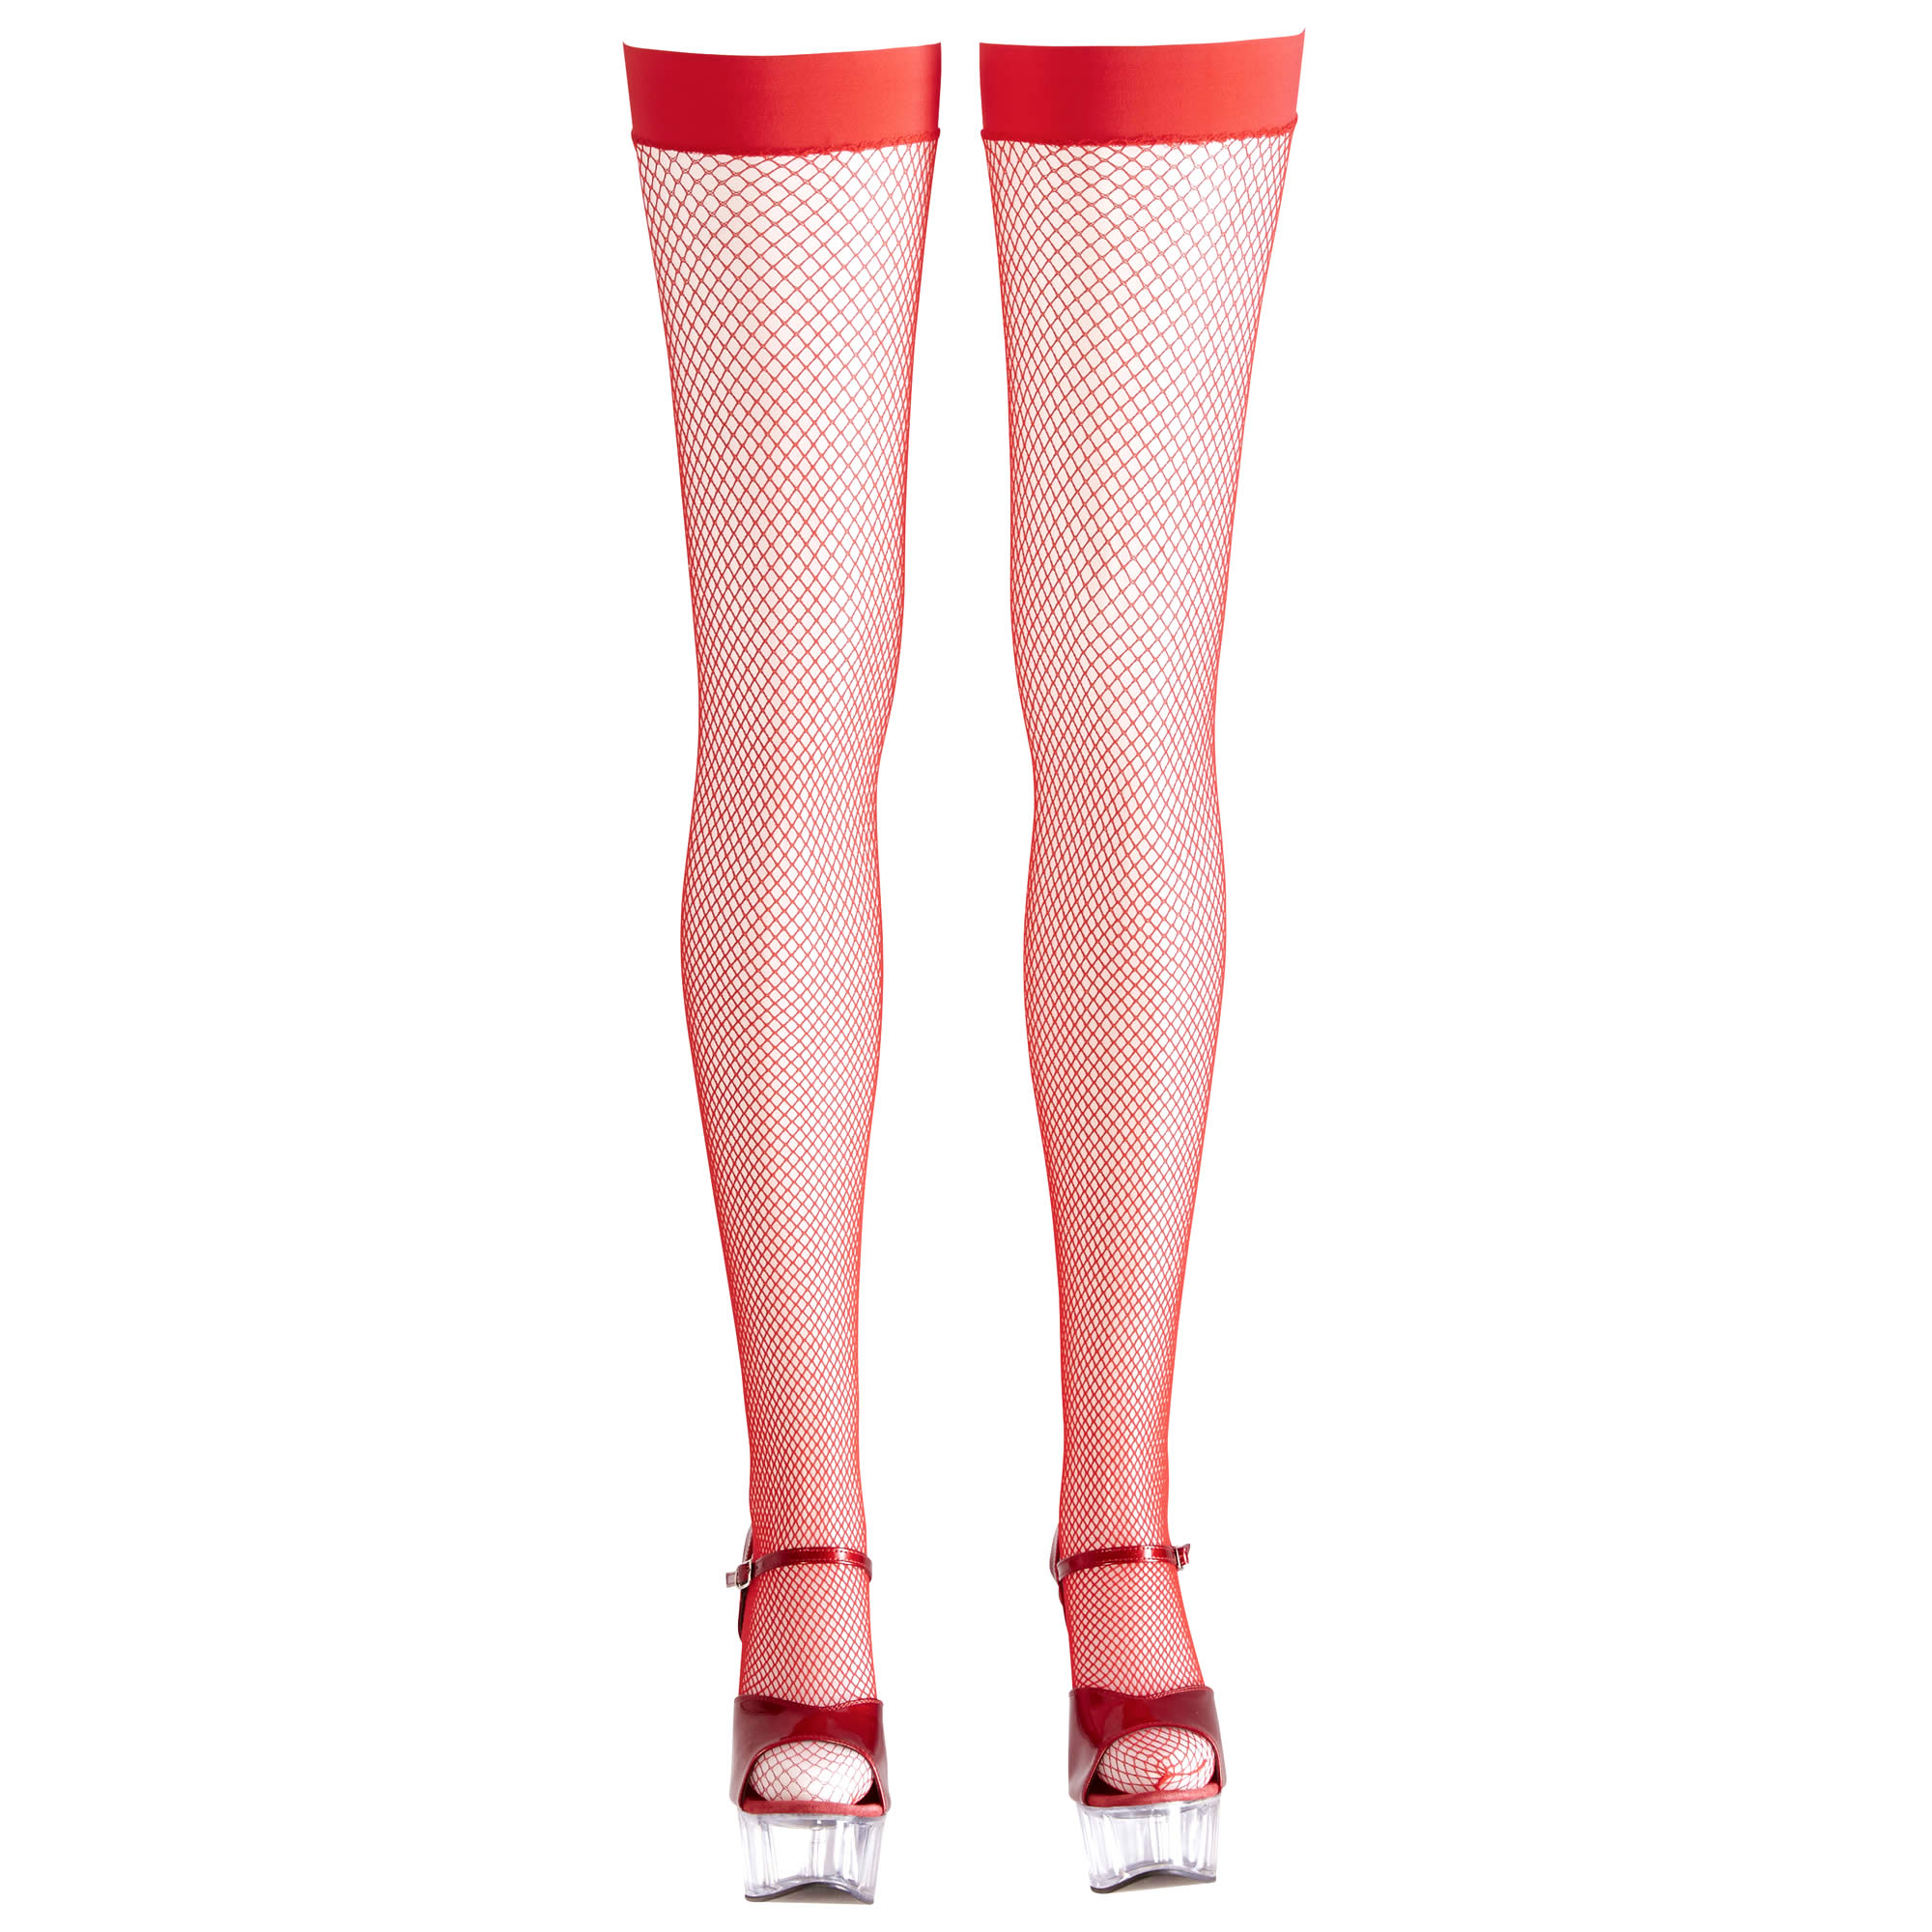 Stay-Up Net Stockings in Red